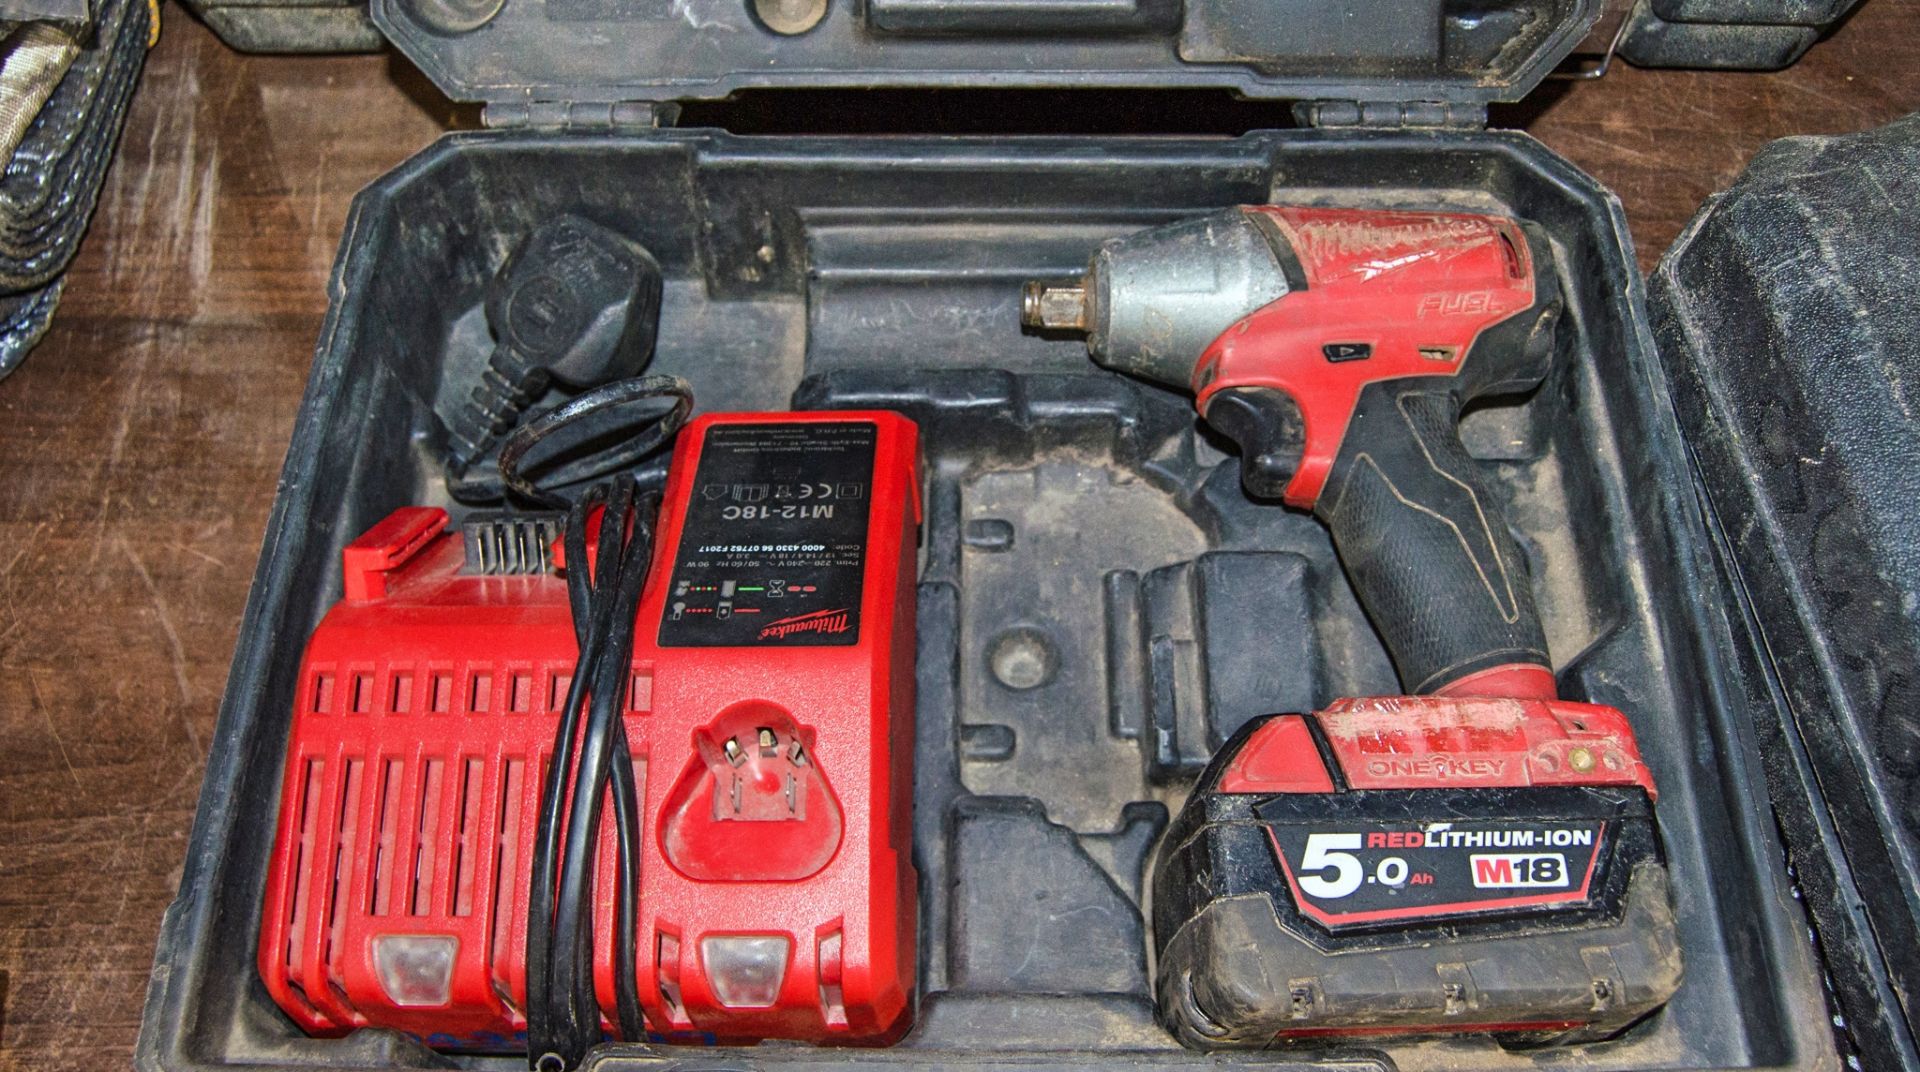 Milwaukee 18v cordless 1/2 inch drive impact gun c/w battery, charger and carry case 04350187